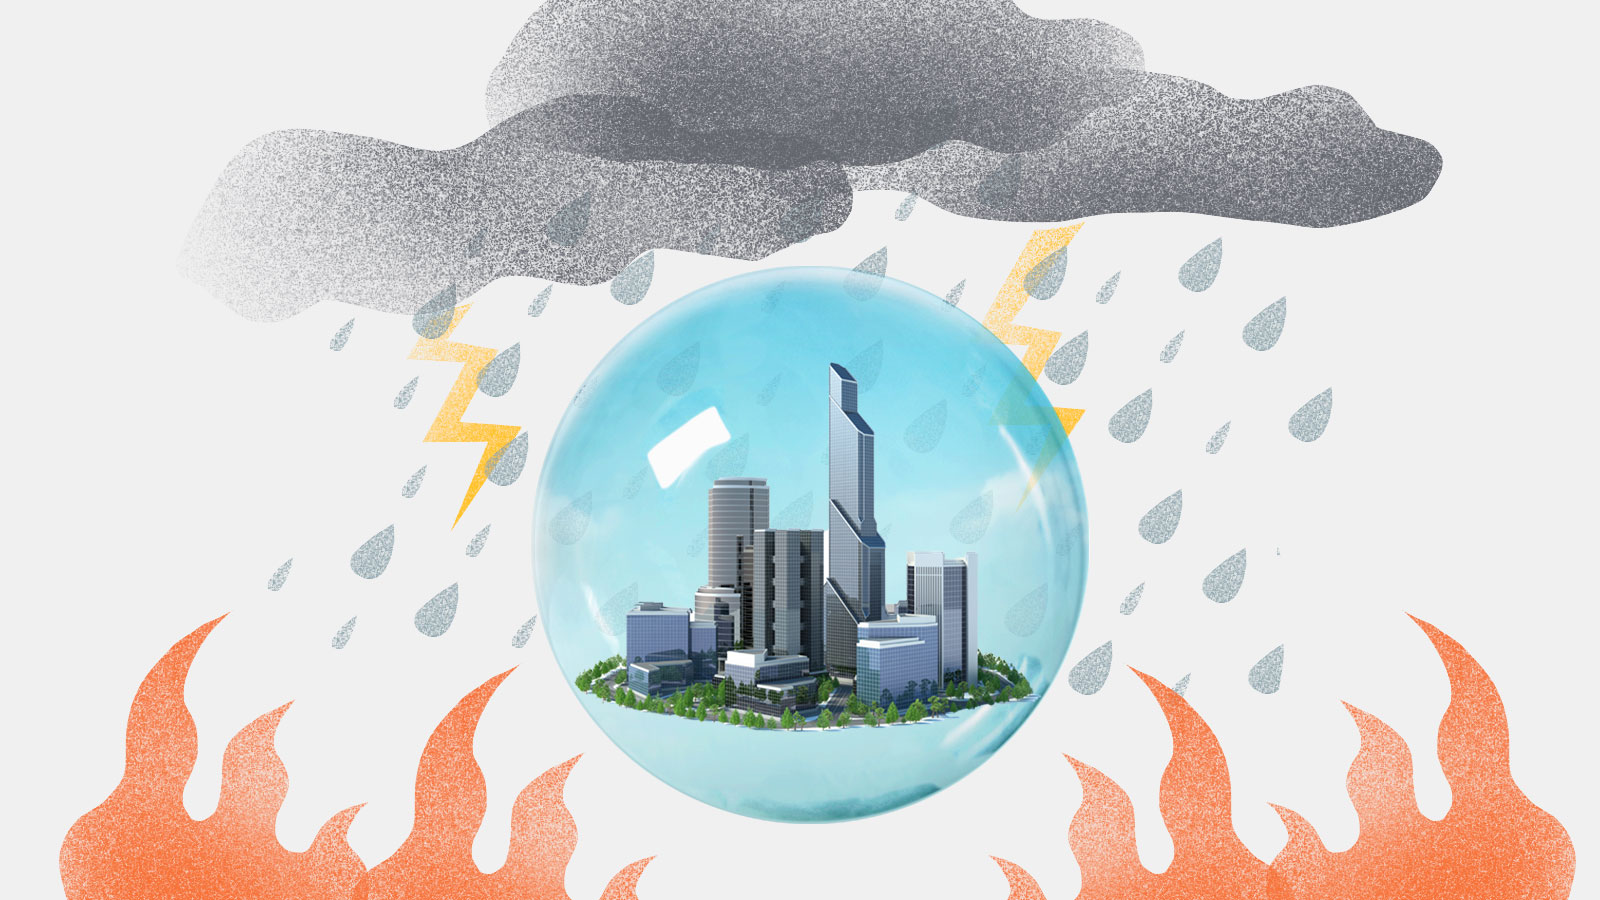 Collage: City in a bubble with storm clouds overhead and fire below